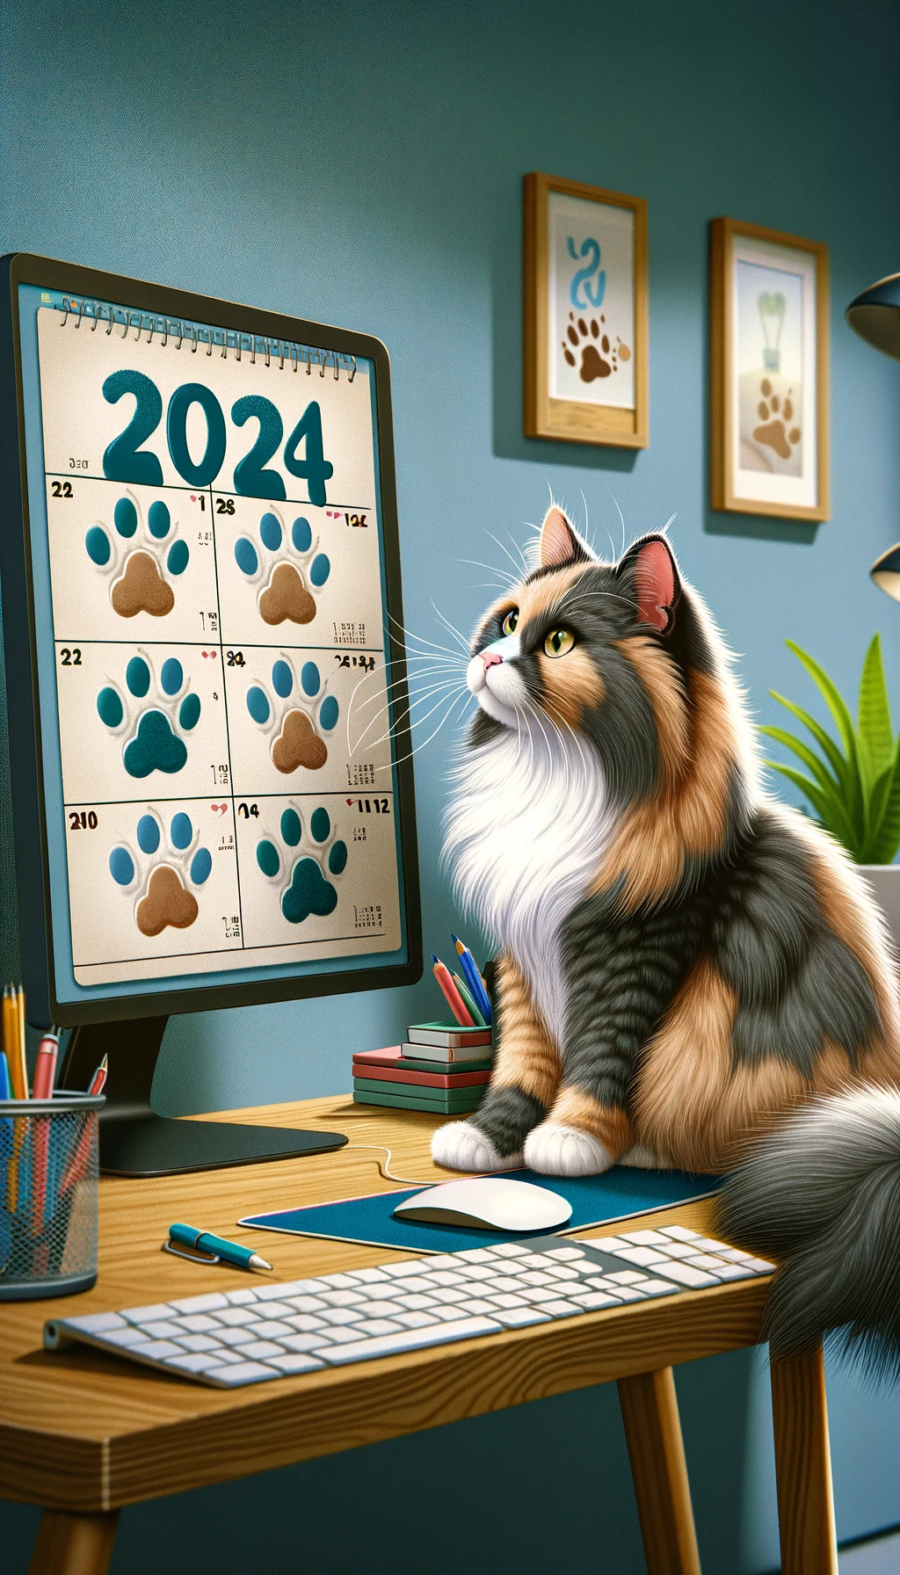 illustration of cat looking at a 2024 calendar on the wall